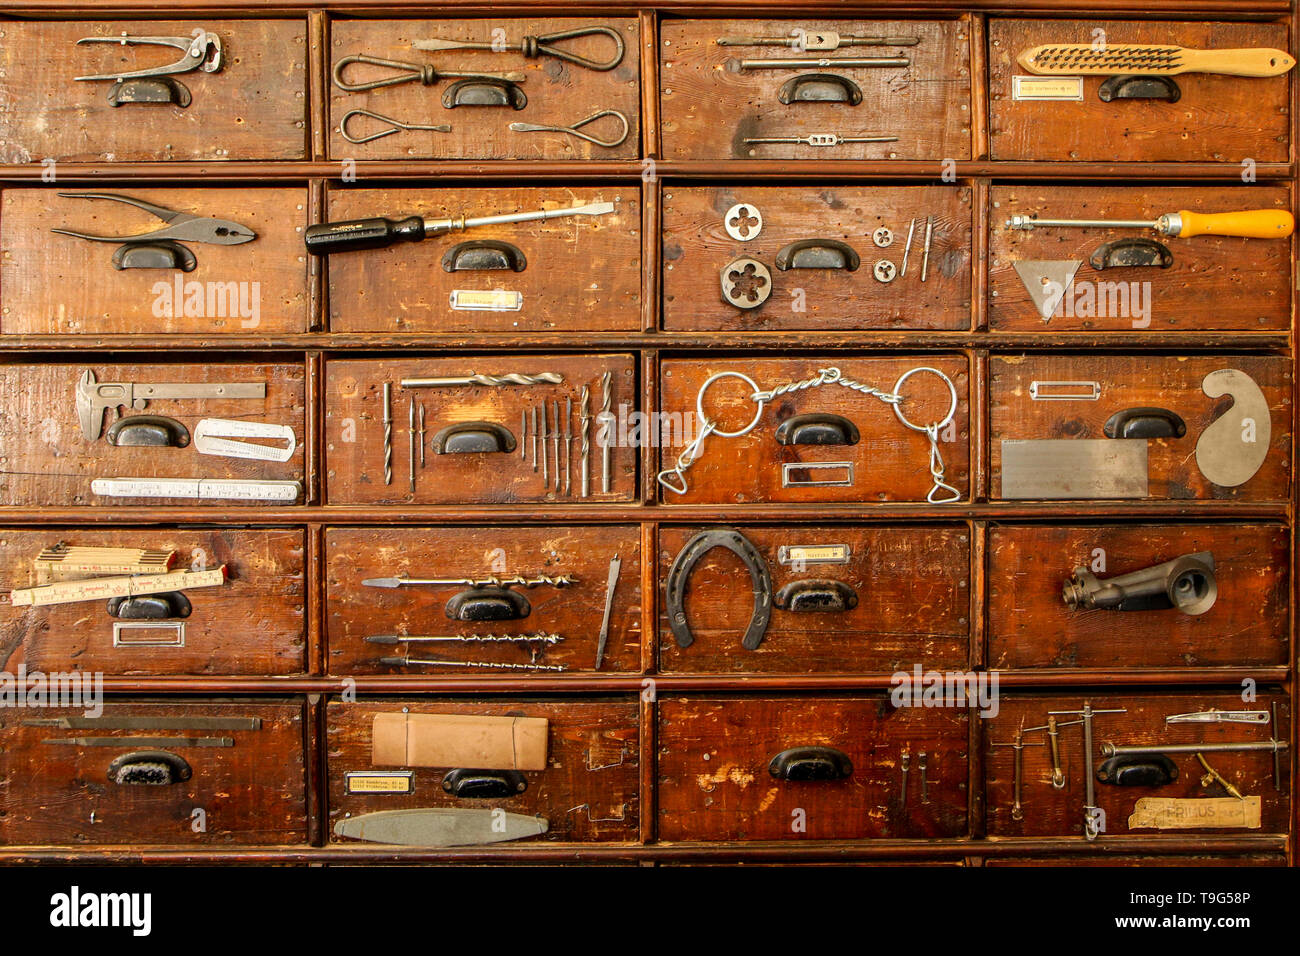 A detail of an old cupboard with drawers, part of the old vintage ironmongery. Stock Photo